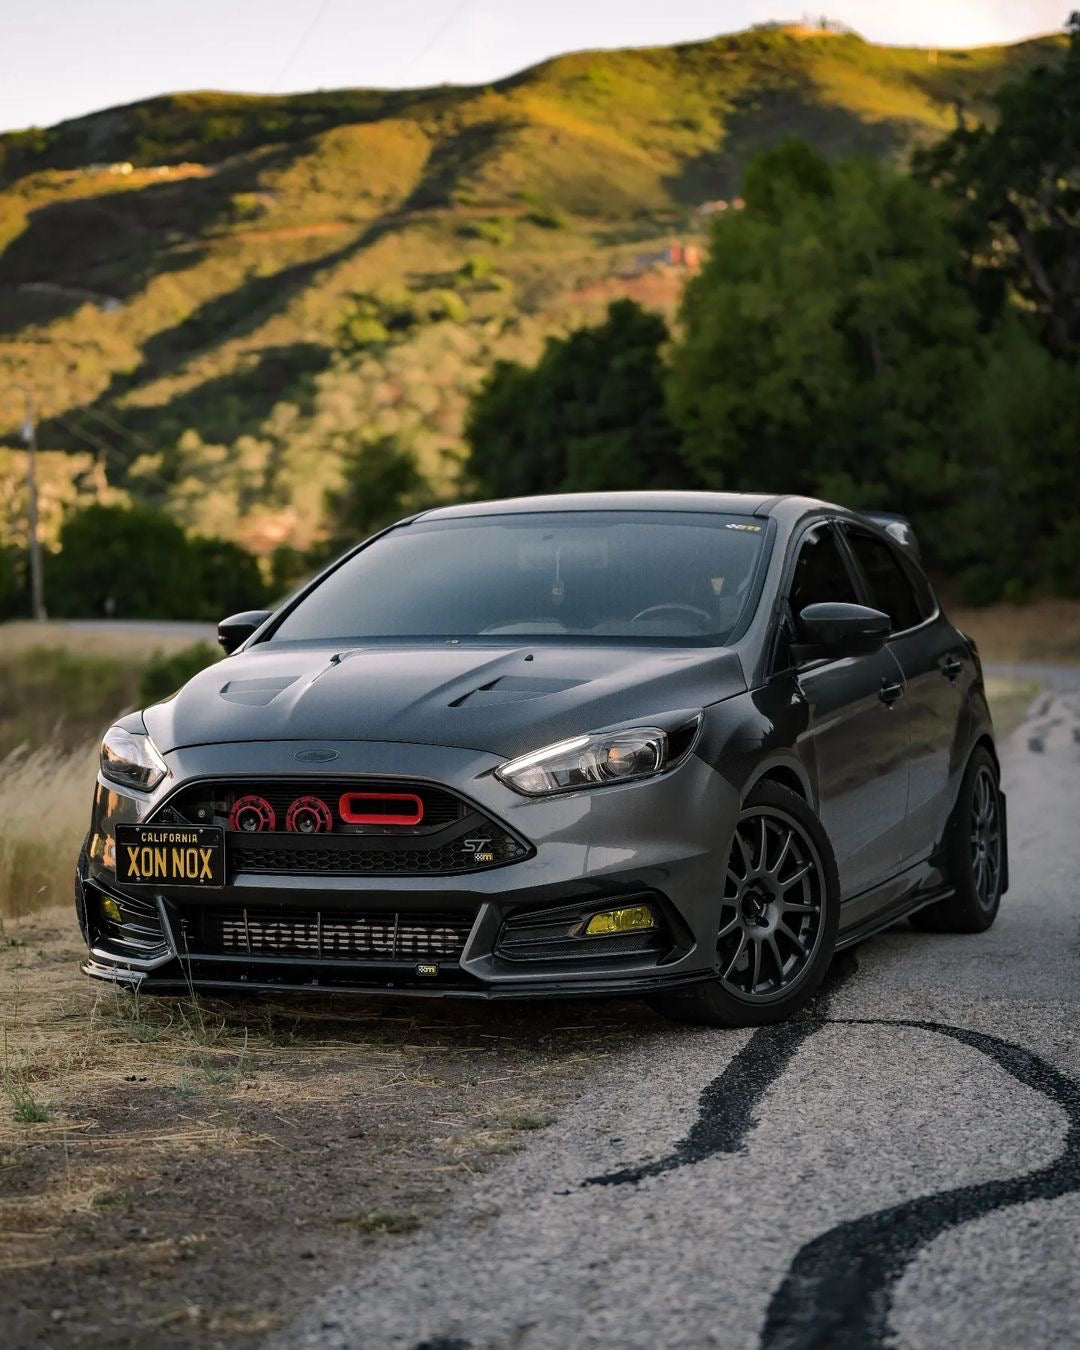 – 2 ST – Upgrades 2.0L Page | USA Mountune EcoBoost Ford Focus